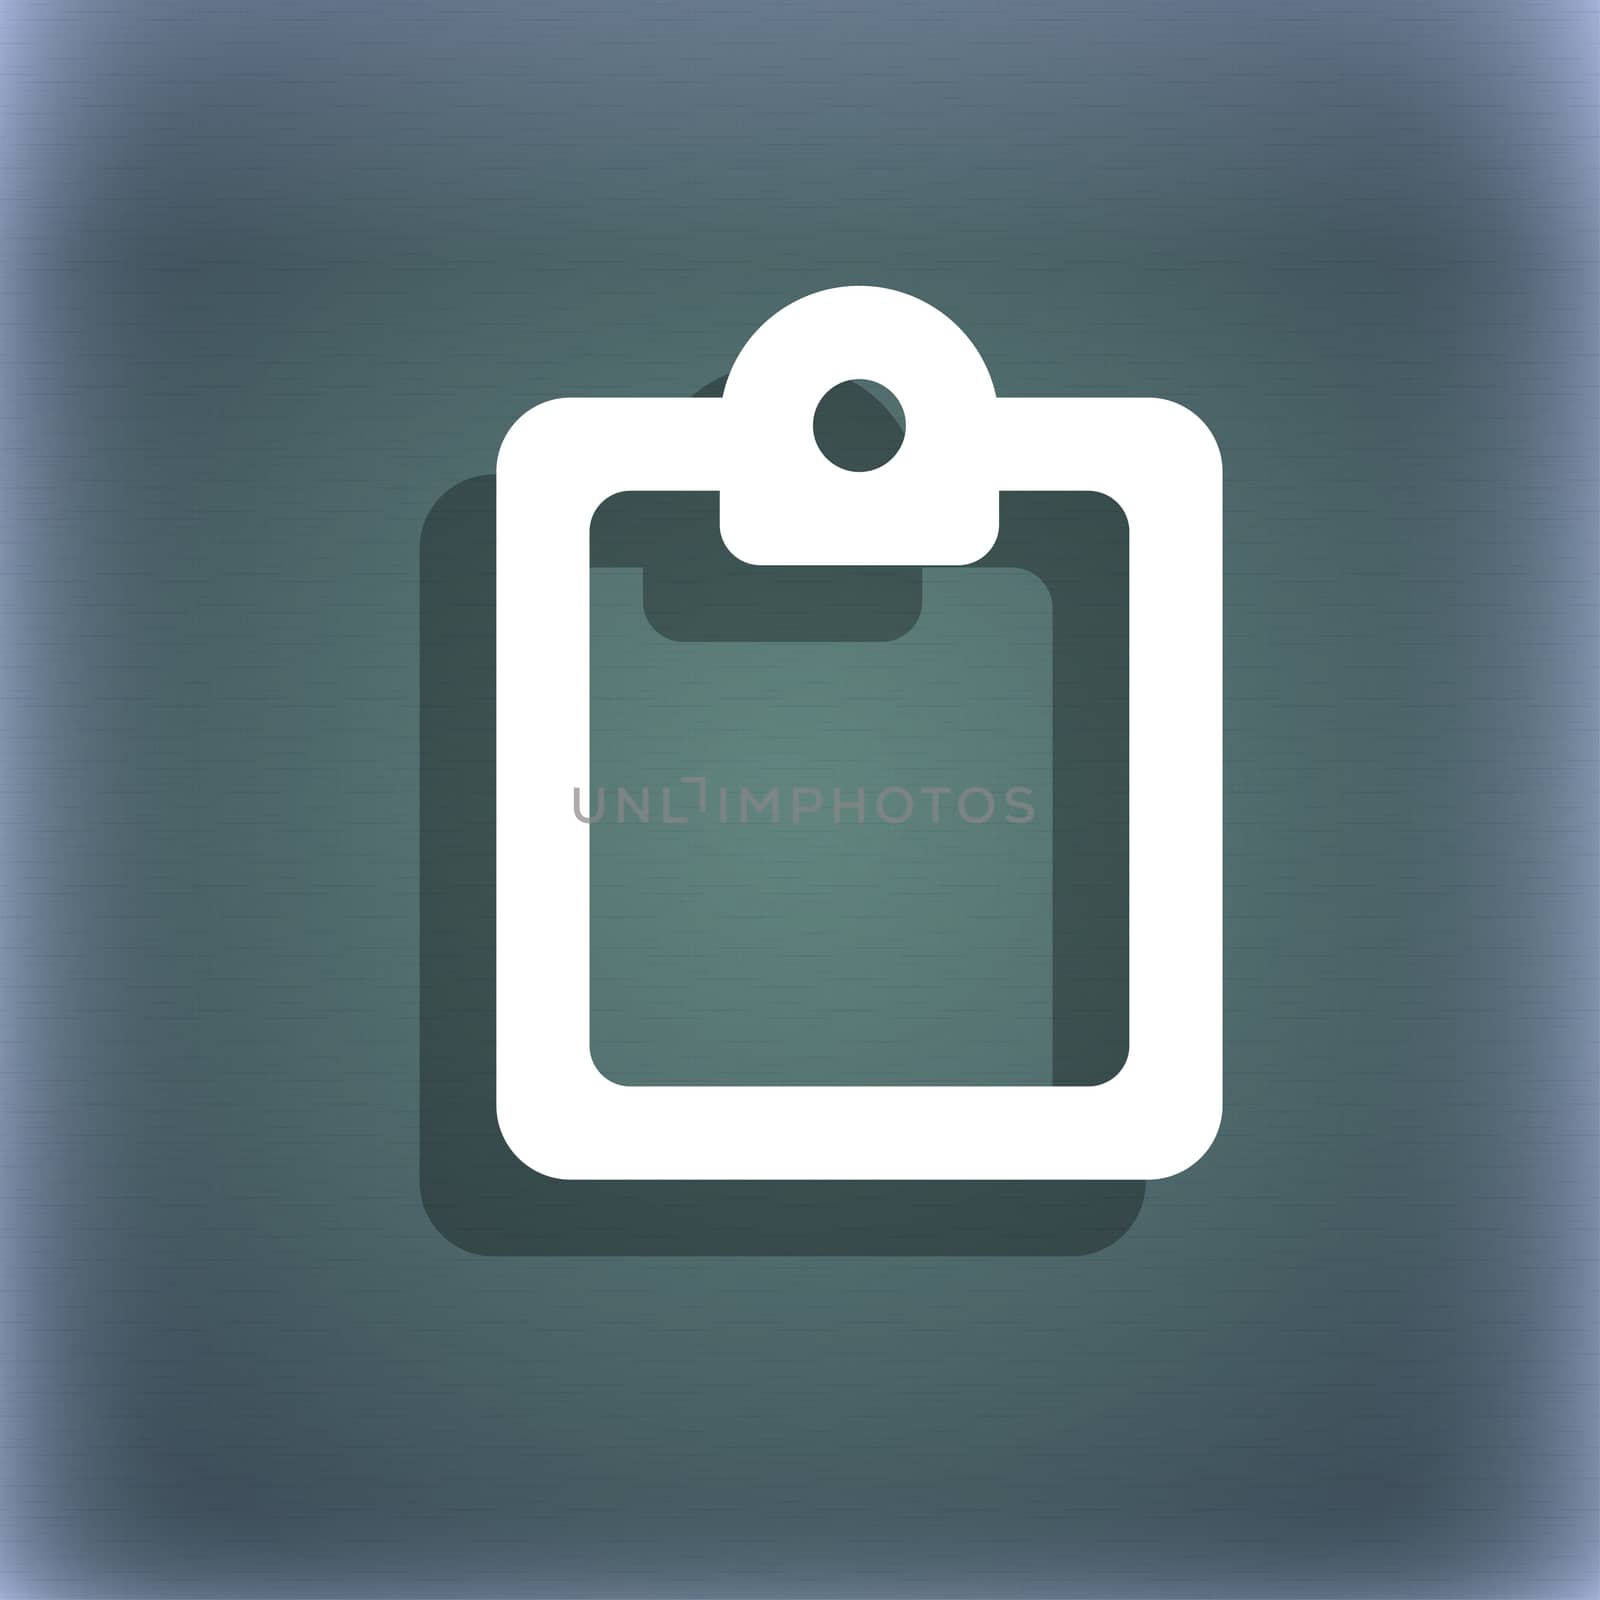 Text file icon symbol on the blue-green abstract background with shadow and space for your text. illustration